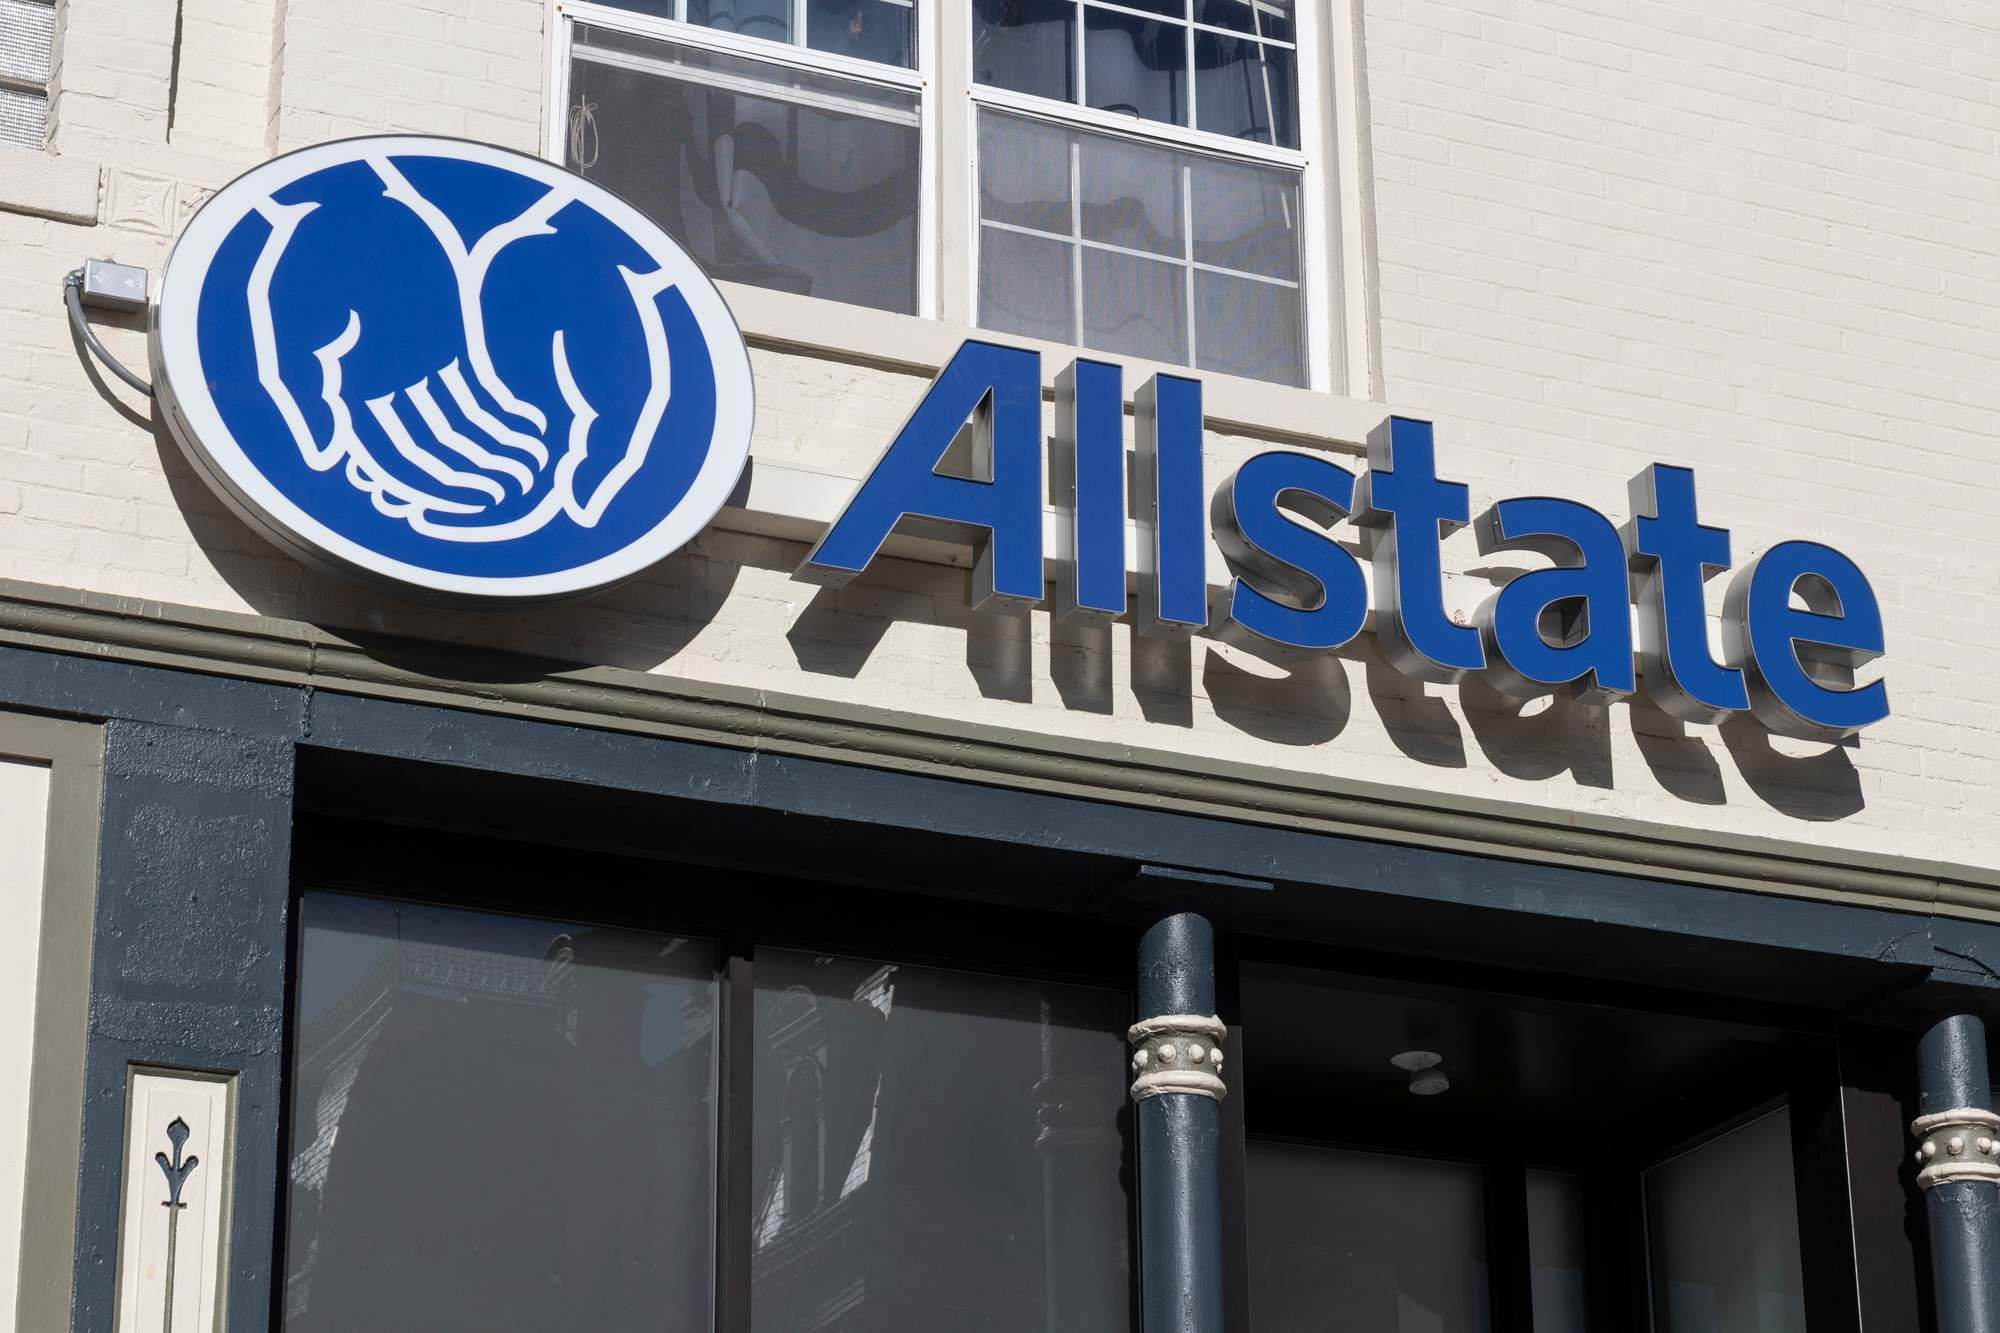 Allstate is facing a class action lawsuit over TCPA violations.